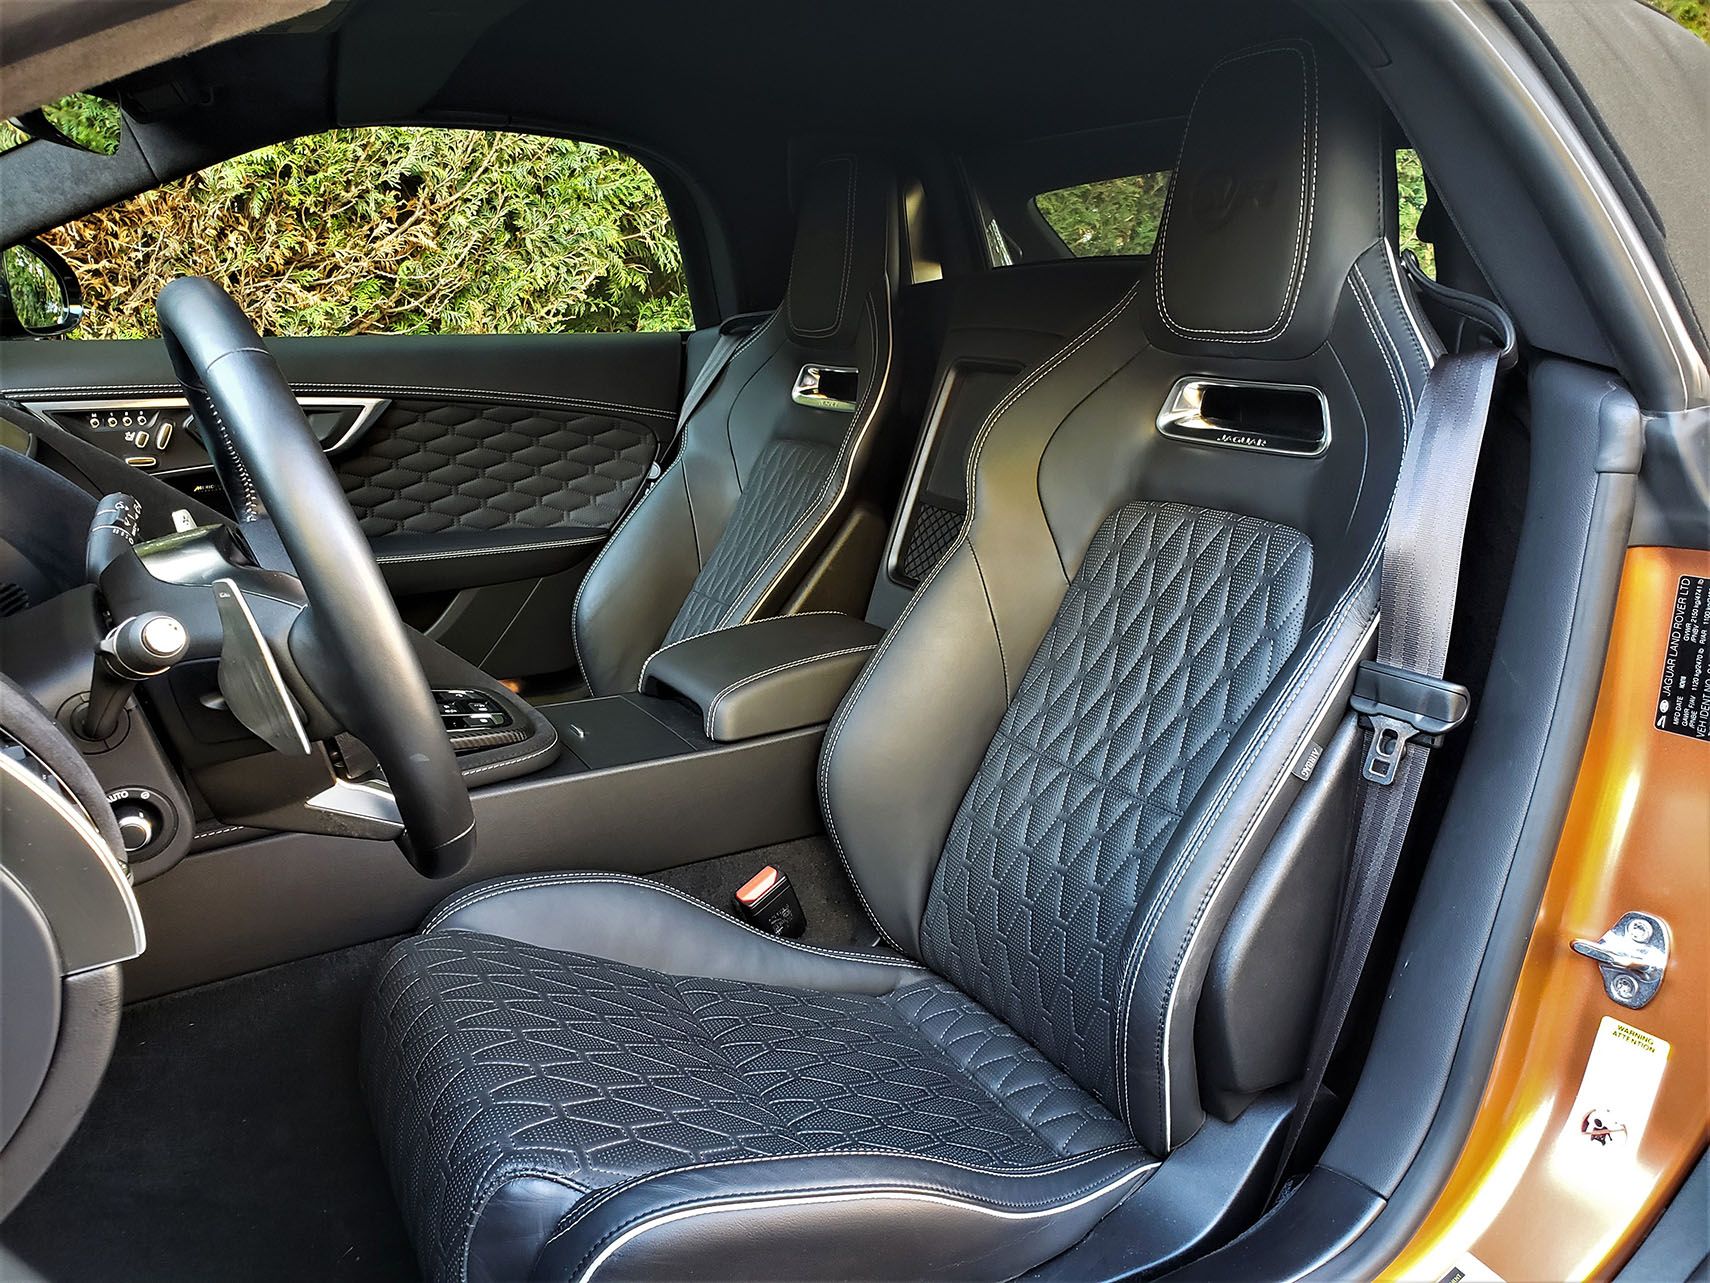 Jaguar's leatherwork is superb, and the F-Type SVR's seats wonderfully comfortable and supportive.